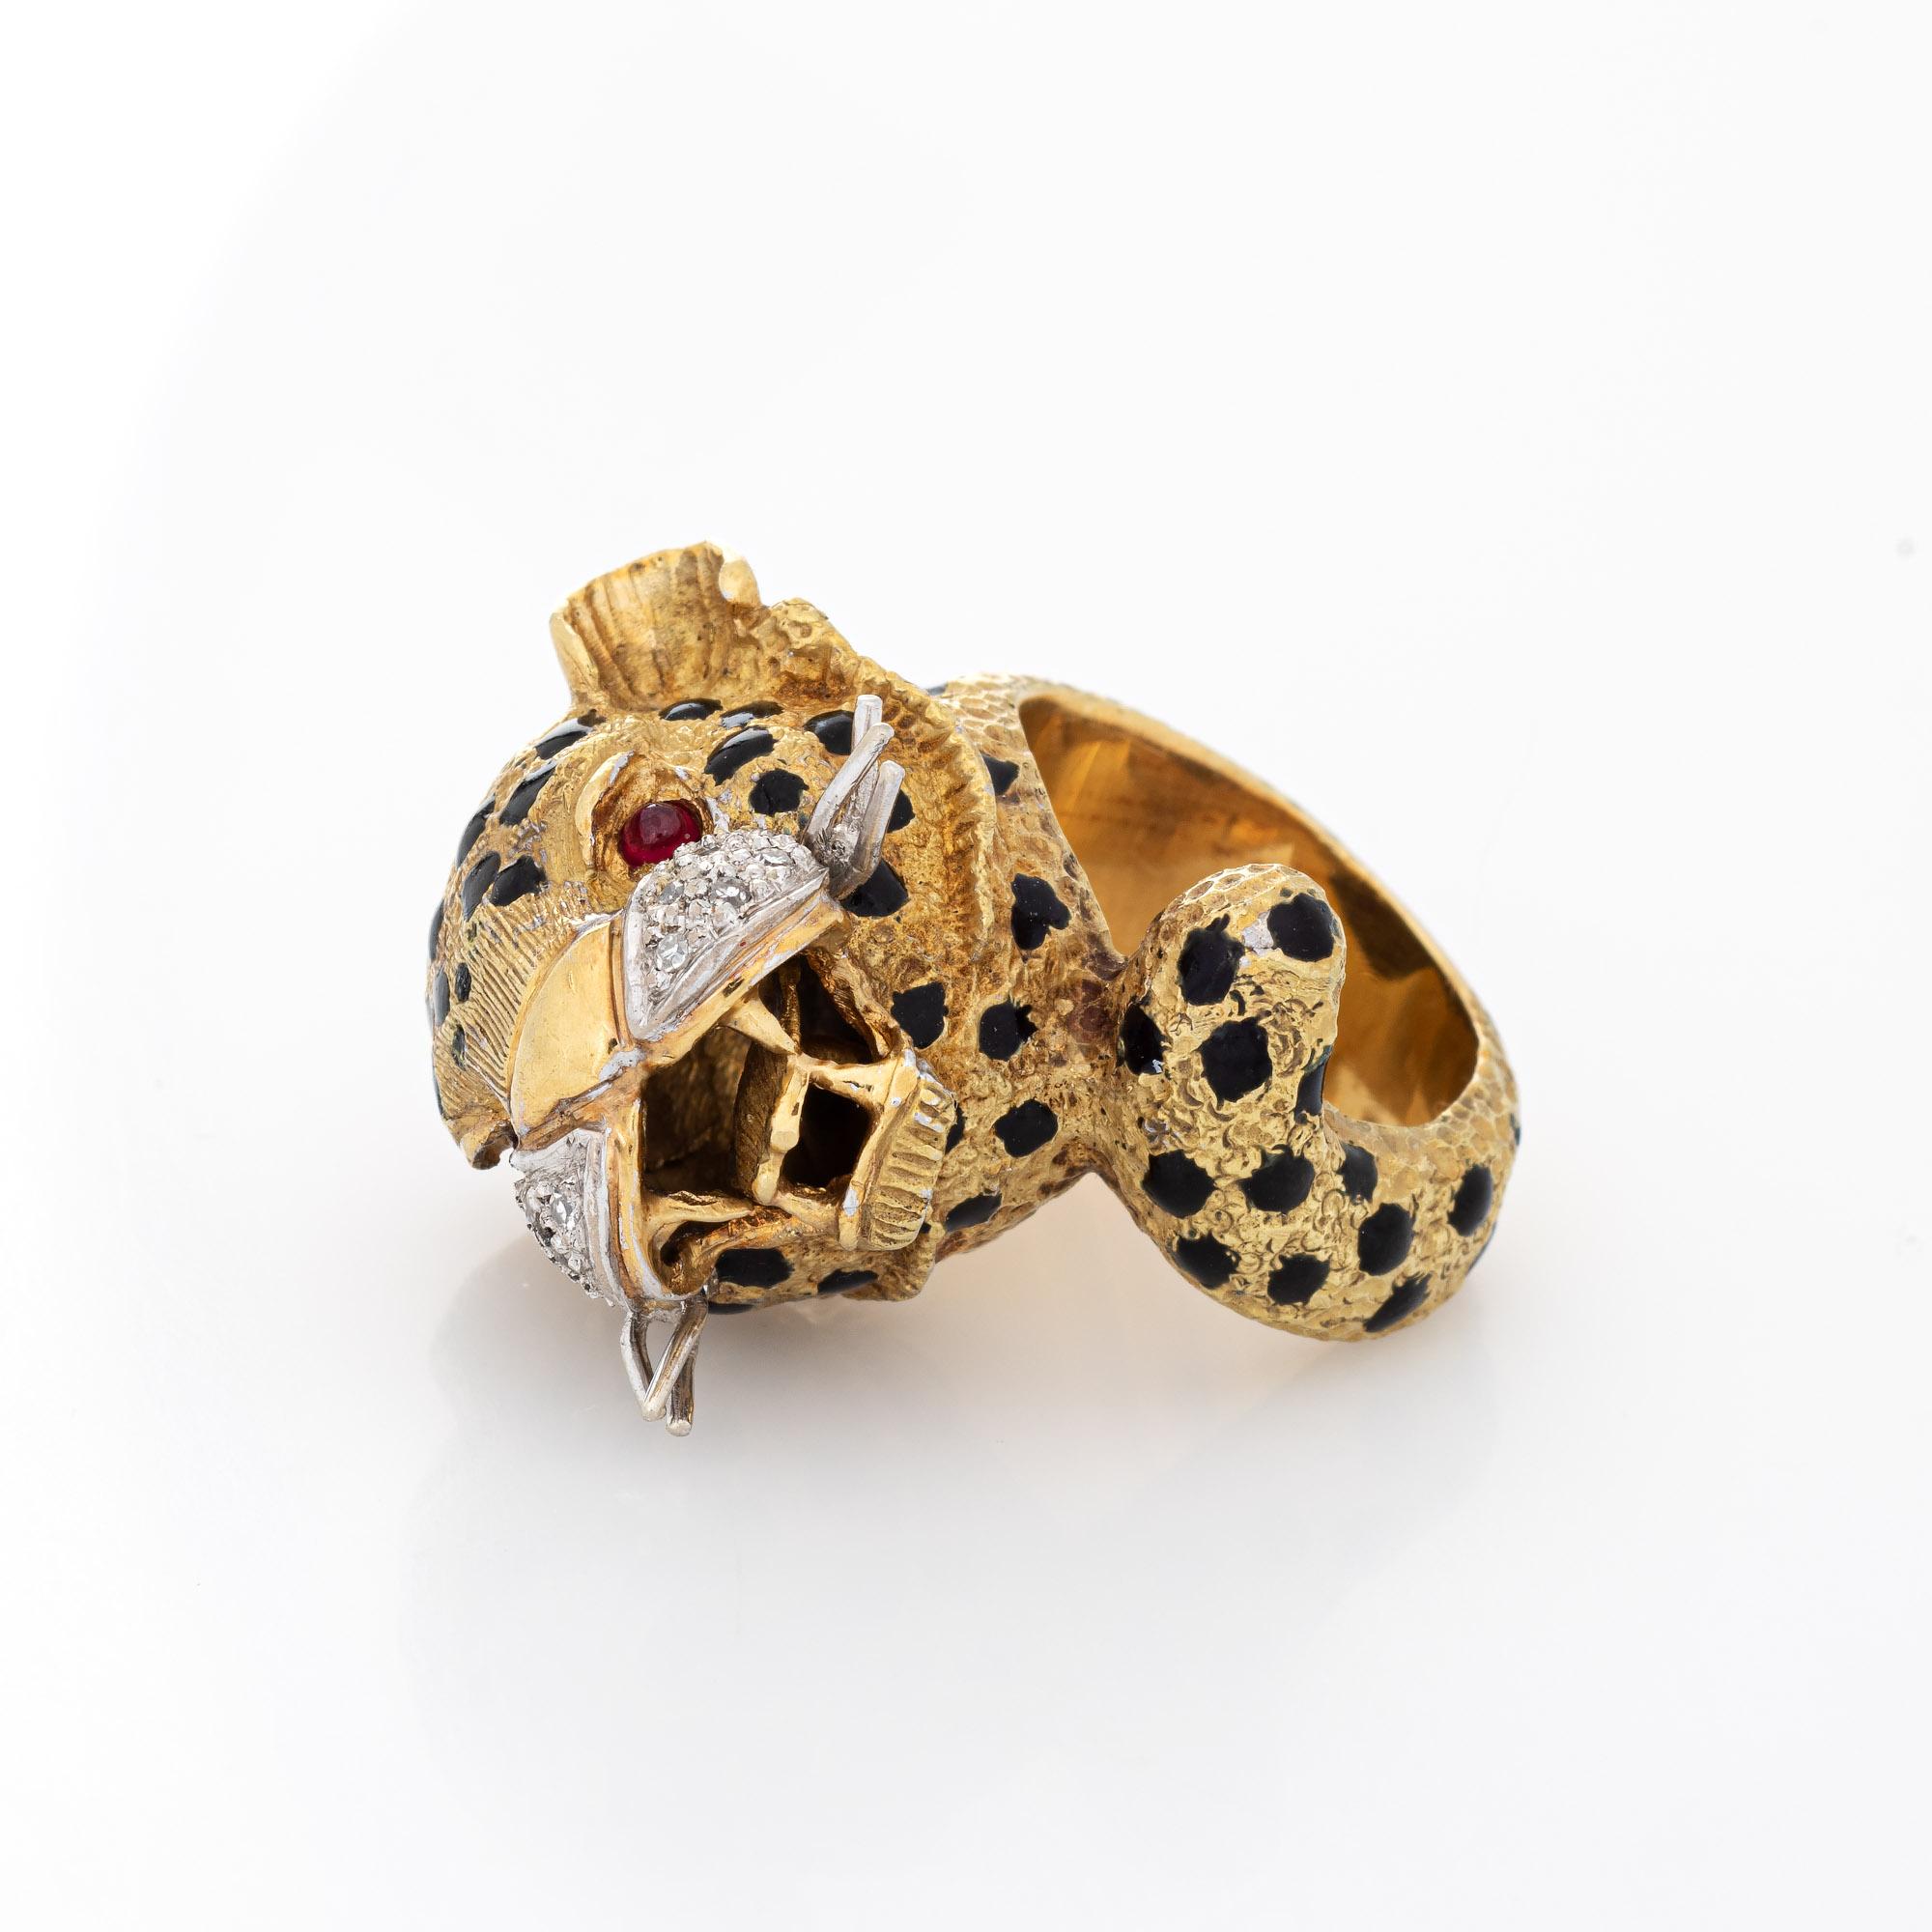 Finely detailed vintage leopard ring crafted in 18k yellow gold (circa 1960s to 1970s).  

Ten single cut diamonds total an estimated 0.05 carats (estimated at H-I color and SI1-2 clarity). Two estimated 0.02 carat cabochon cut rubies are set into